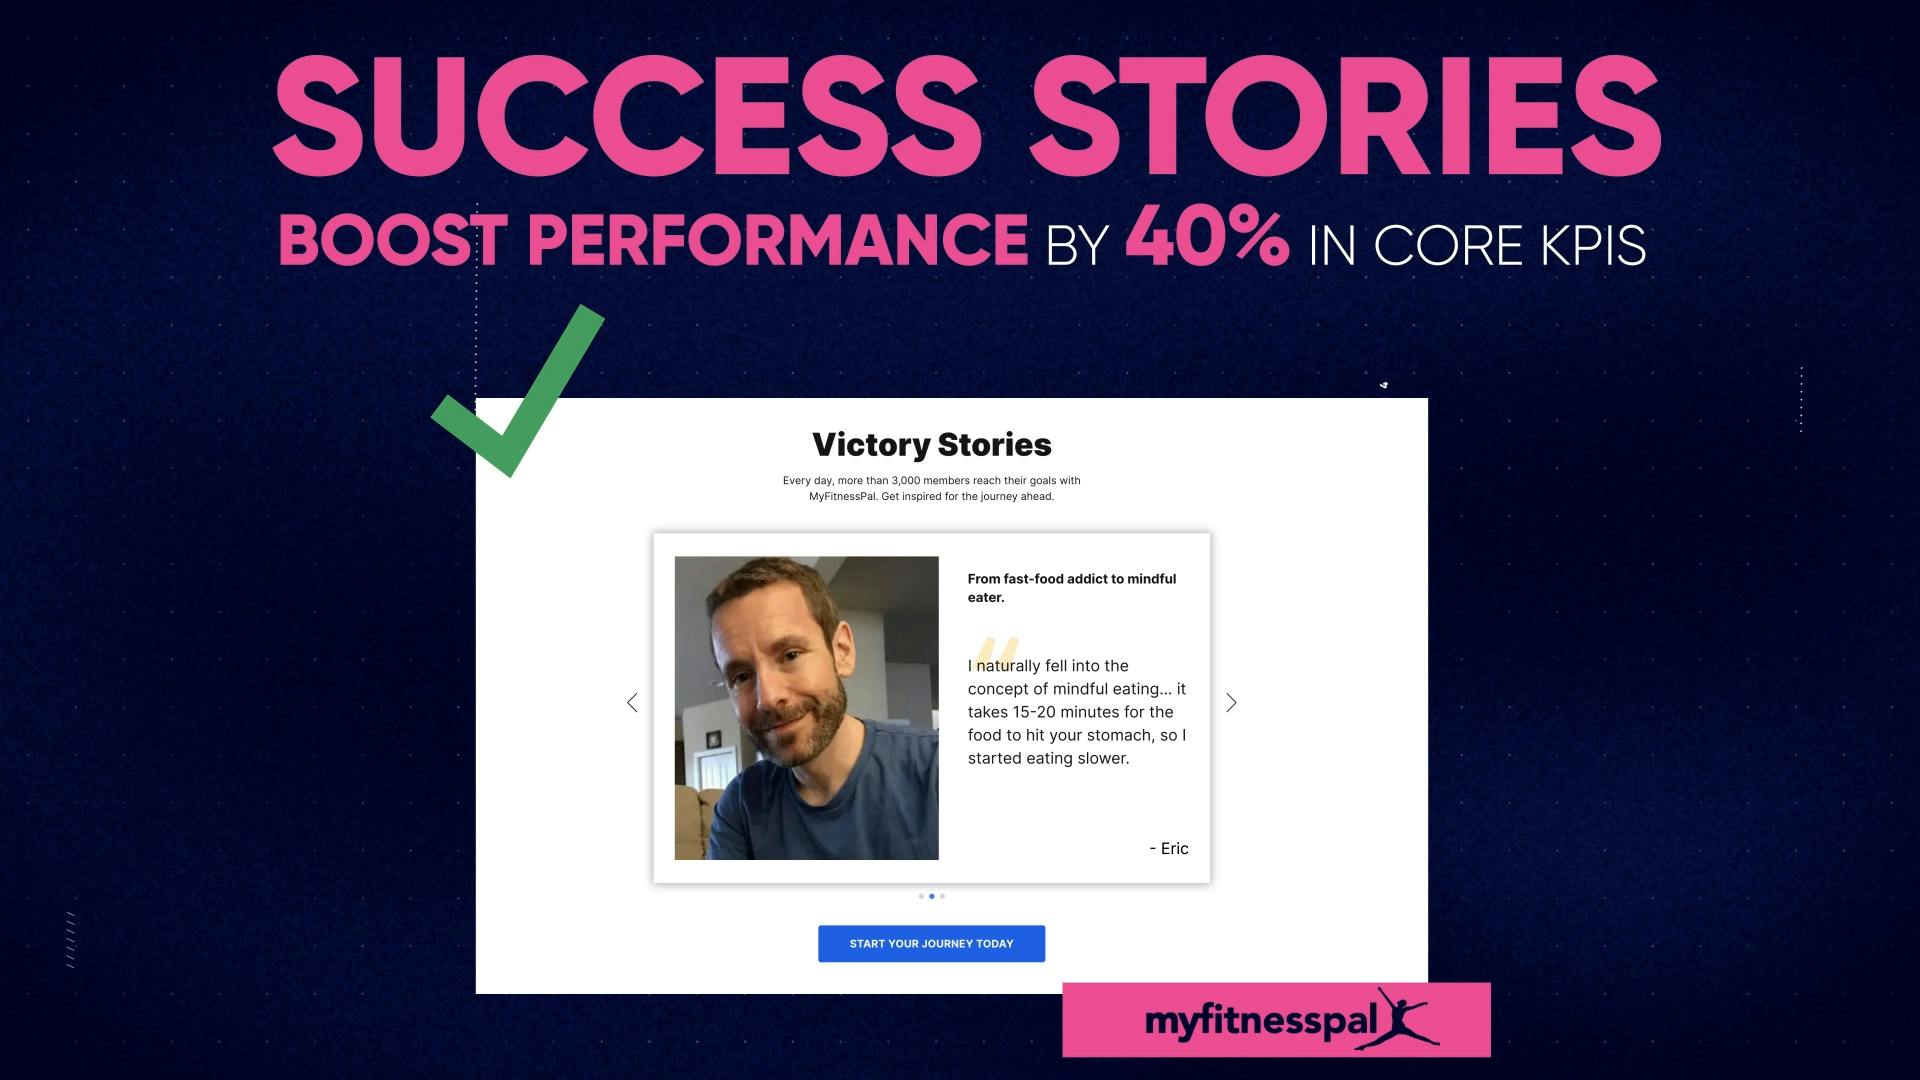 Success stories boost performance by 40% in core KPIs